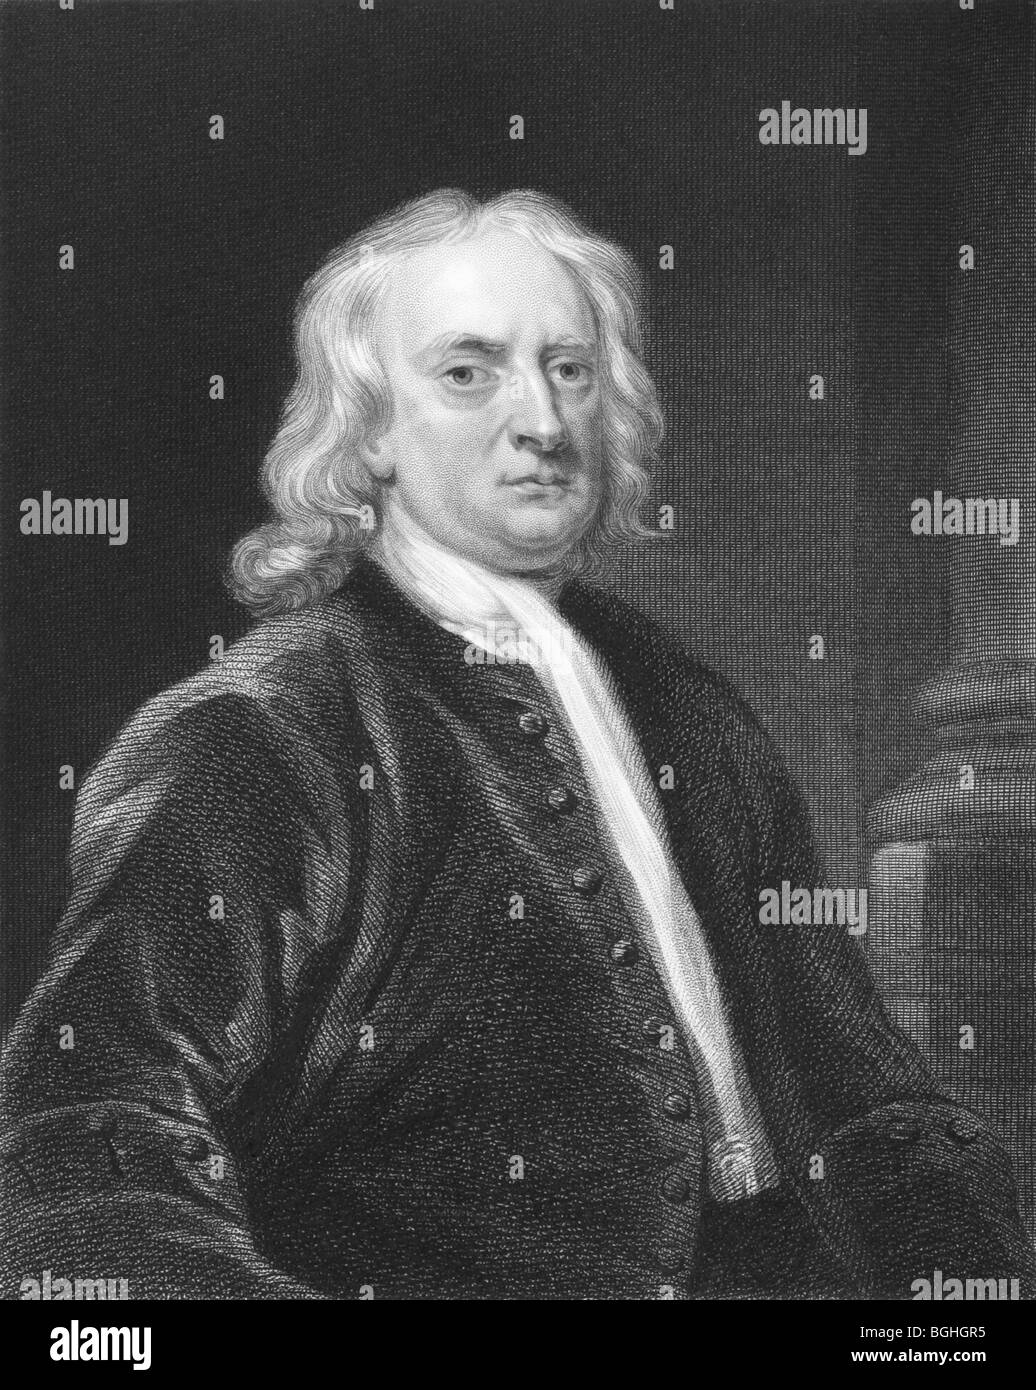 Isaac Newton on engraving from the 1850s. One of the most influential scientists in history. Stock Photo